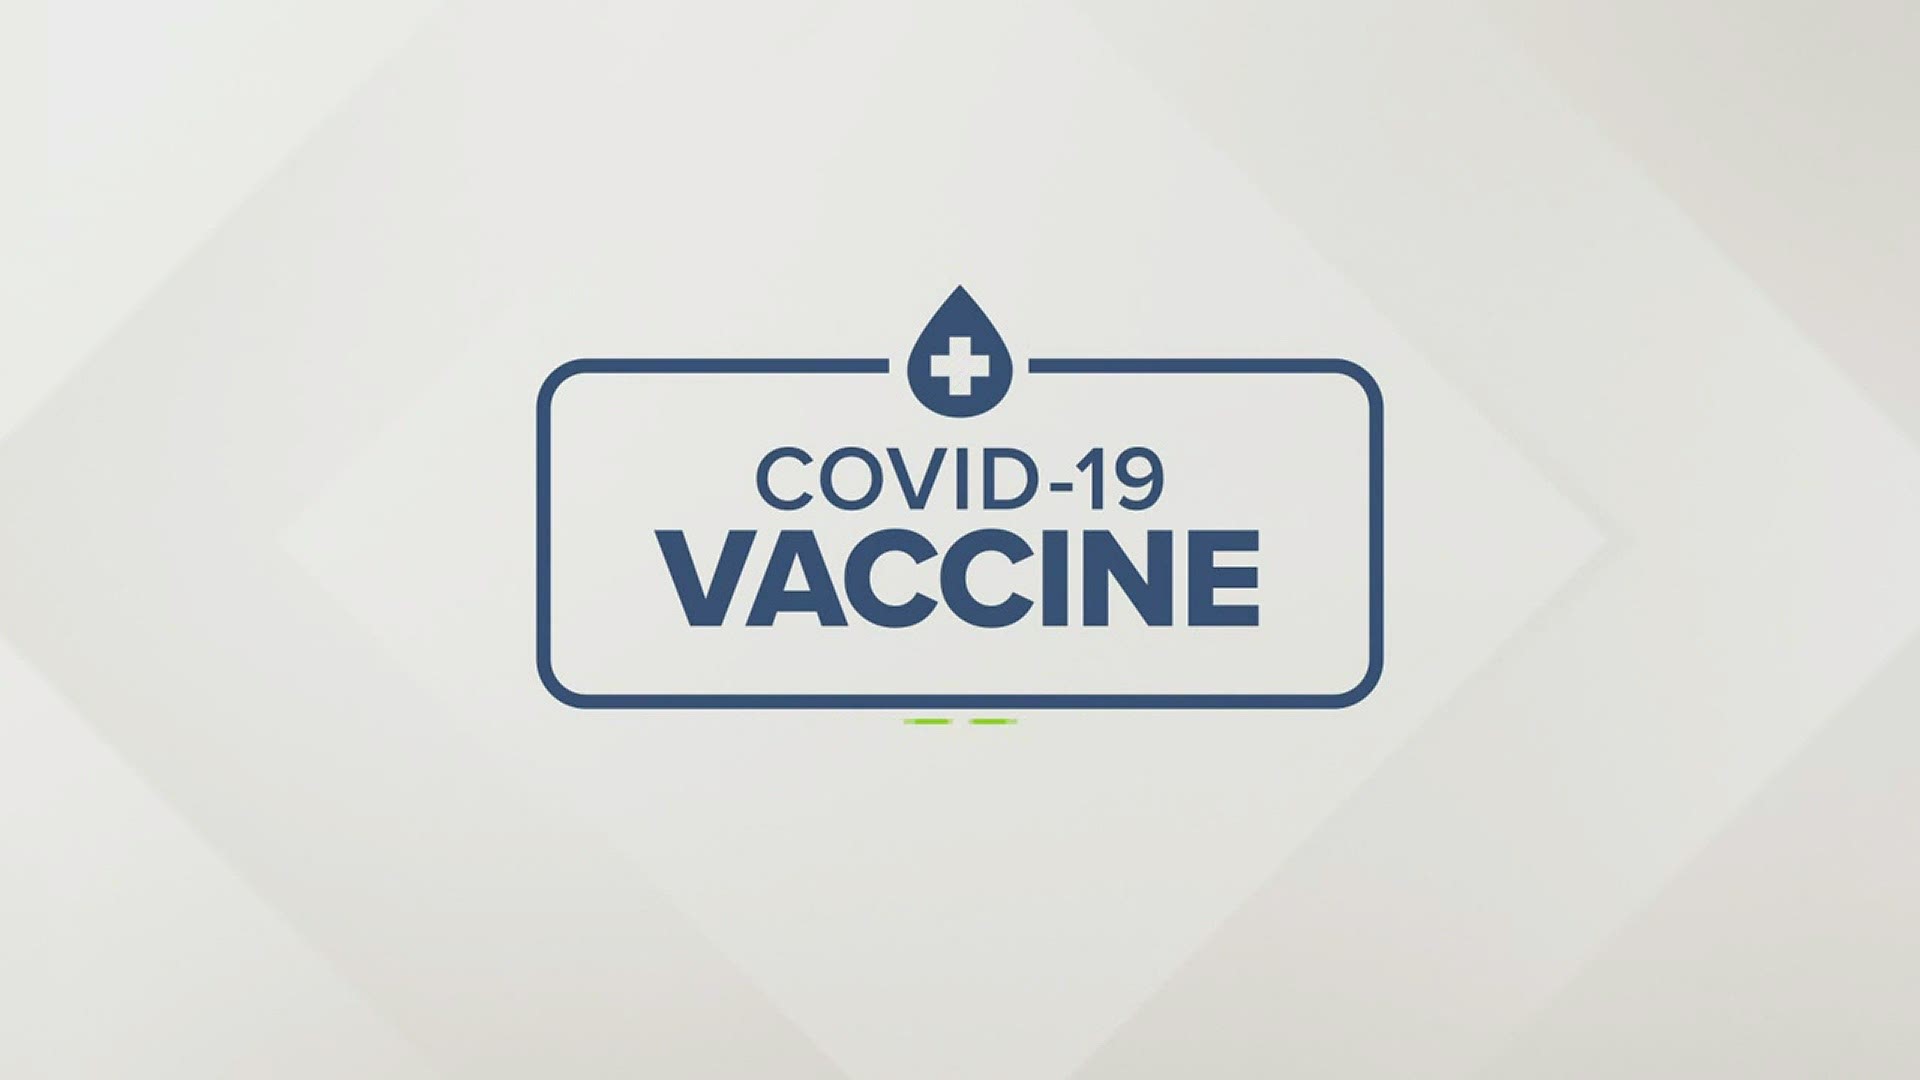 From vaccine clinics to FAQ's, here is where you can find information on the COVID-19 vaccine in the Coastal Bend.